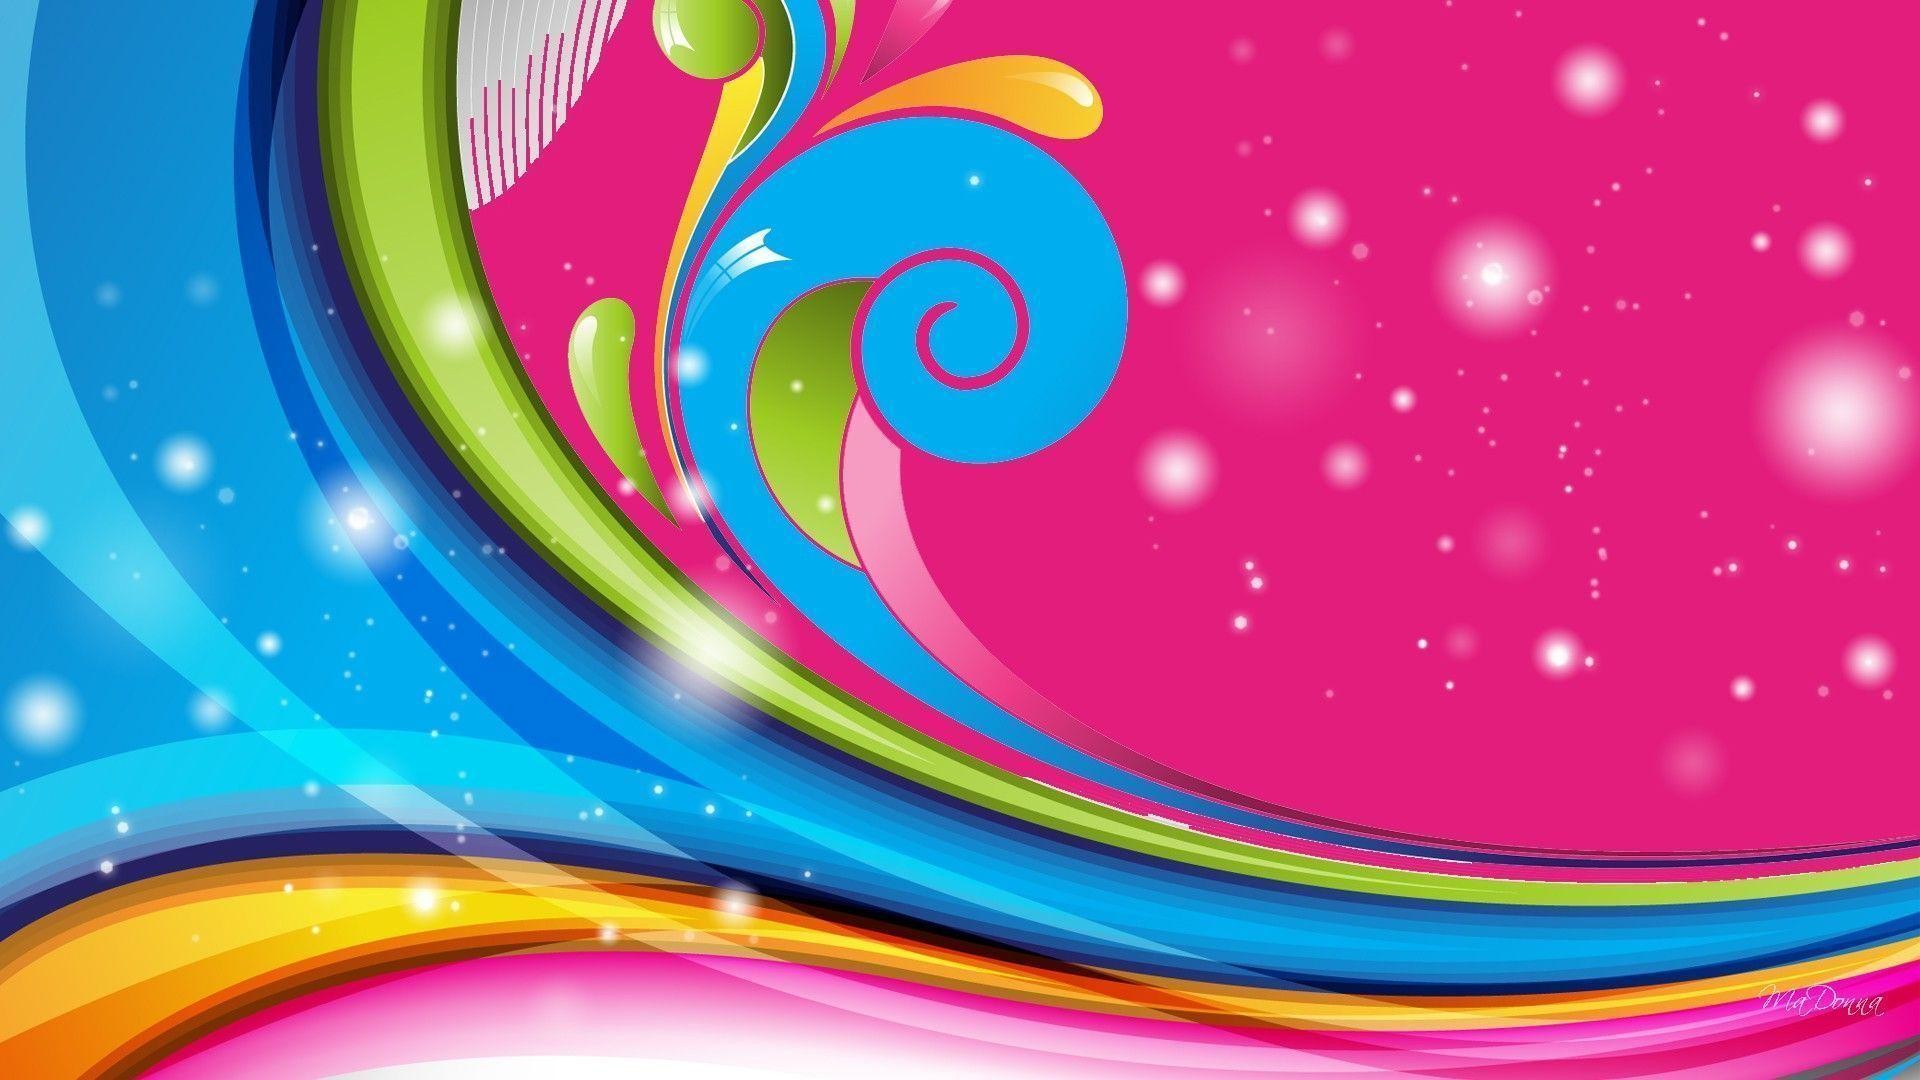 1920x1080 colorful rainbow colors wallpapers - DriverLayer Search Engine